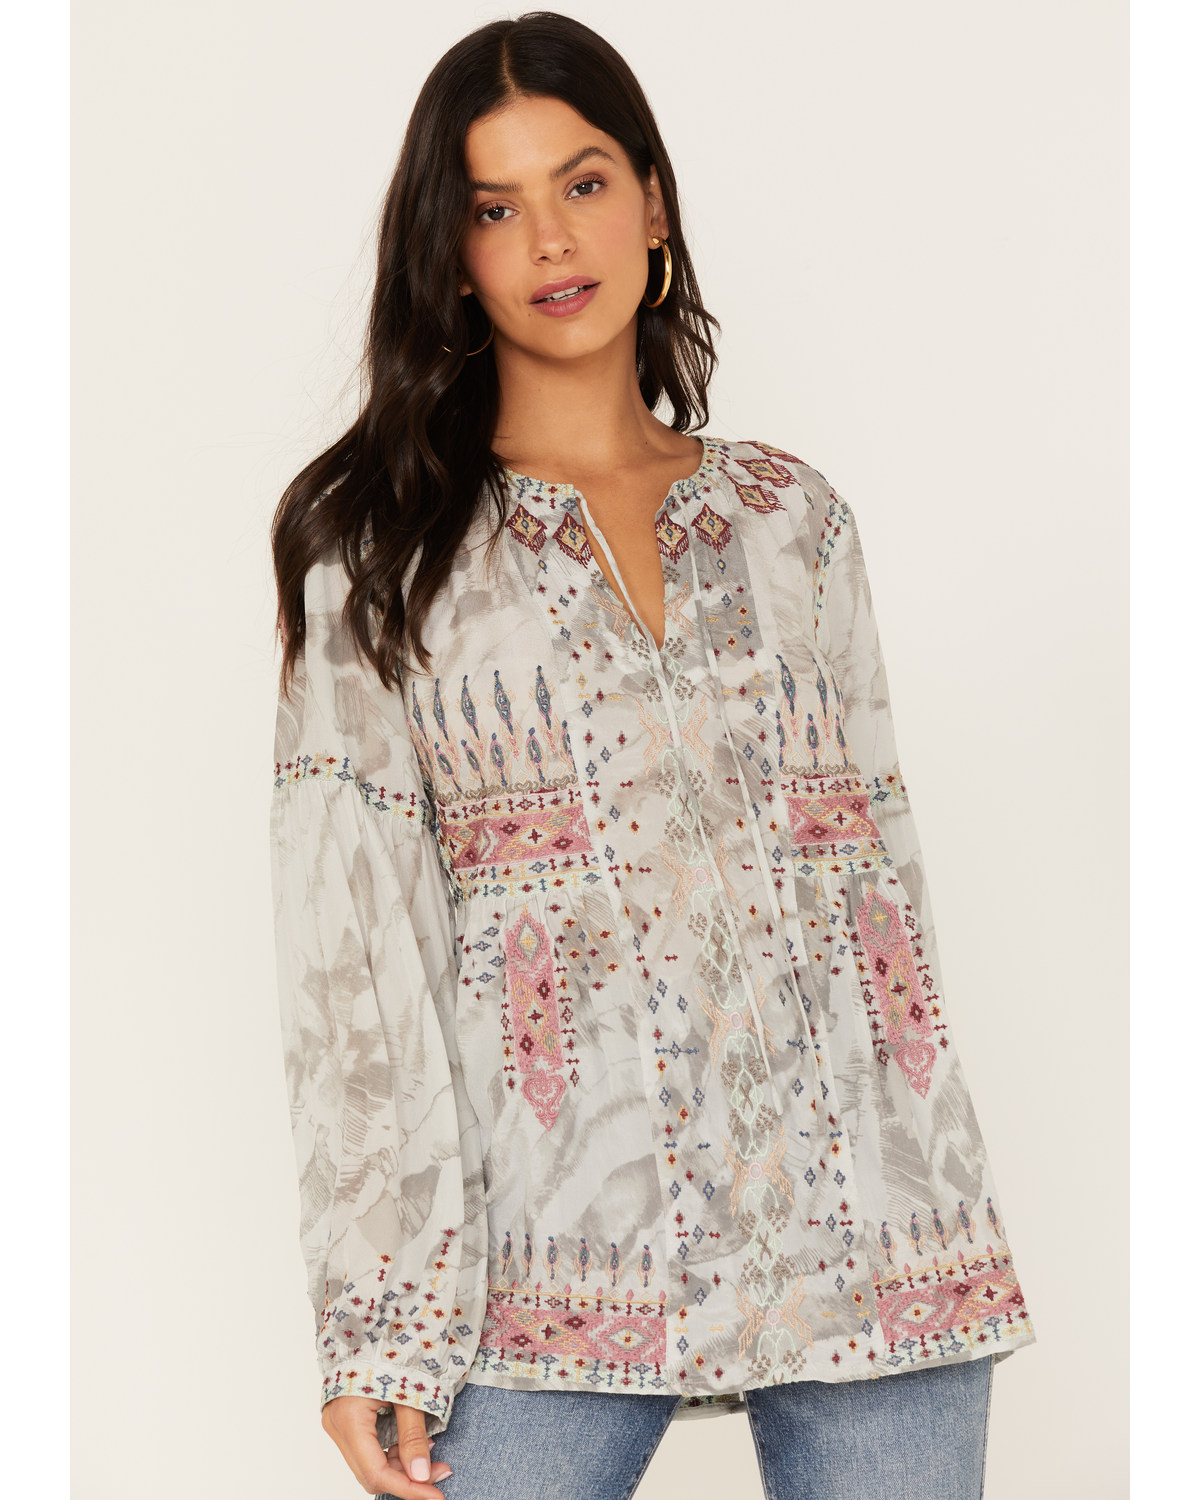 Johnny Was Women's Deliza Embroidered Silk Blouse